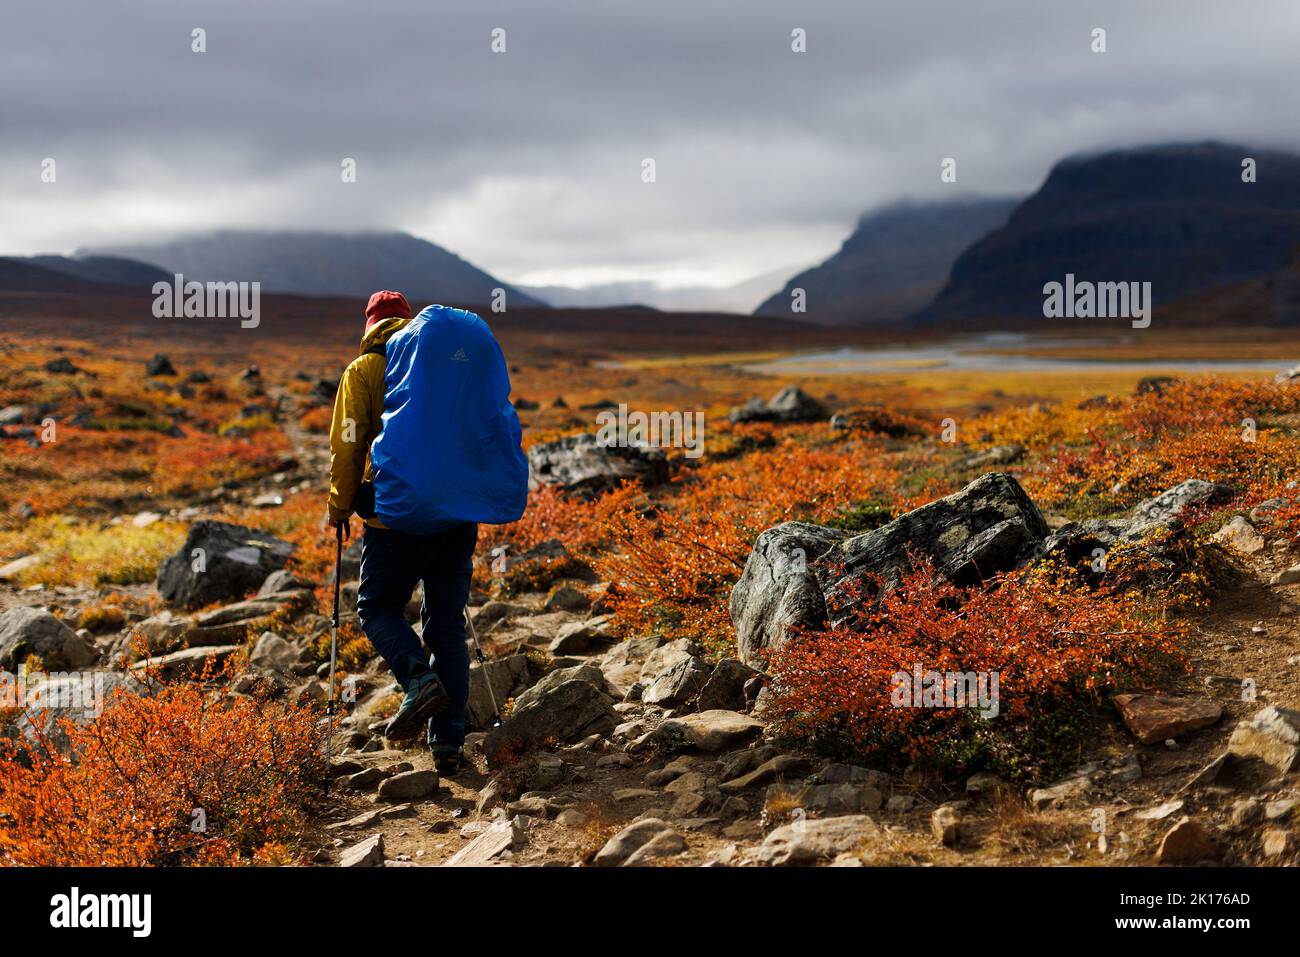 A hiker makes his way along King's Trail (Kungsleden) hiking route, during autumn in Lapland, near Abisko, Sweden September 12, 2022. REUTERS/Lisi Niesner Stock Photo